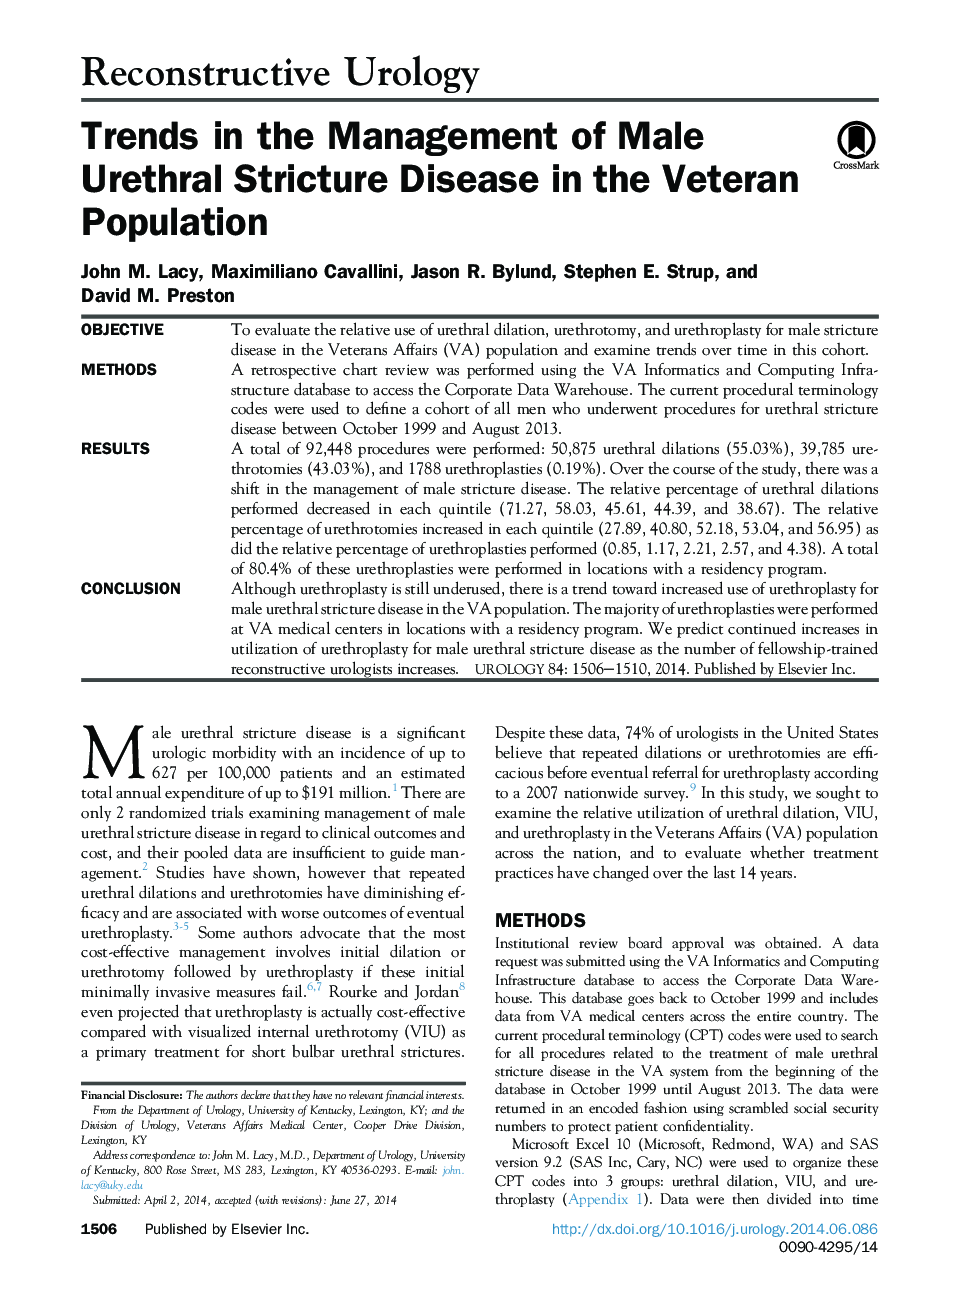 Trends in the Management of Male Urethral Stricture Disease in the Veteran Population 